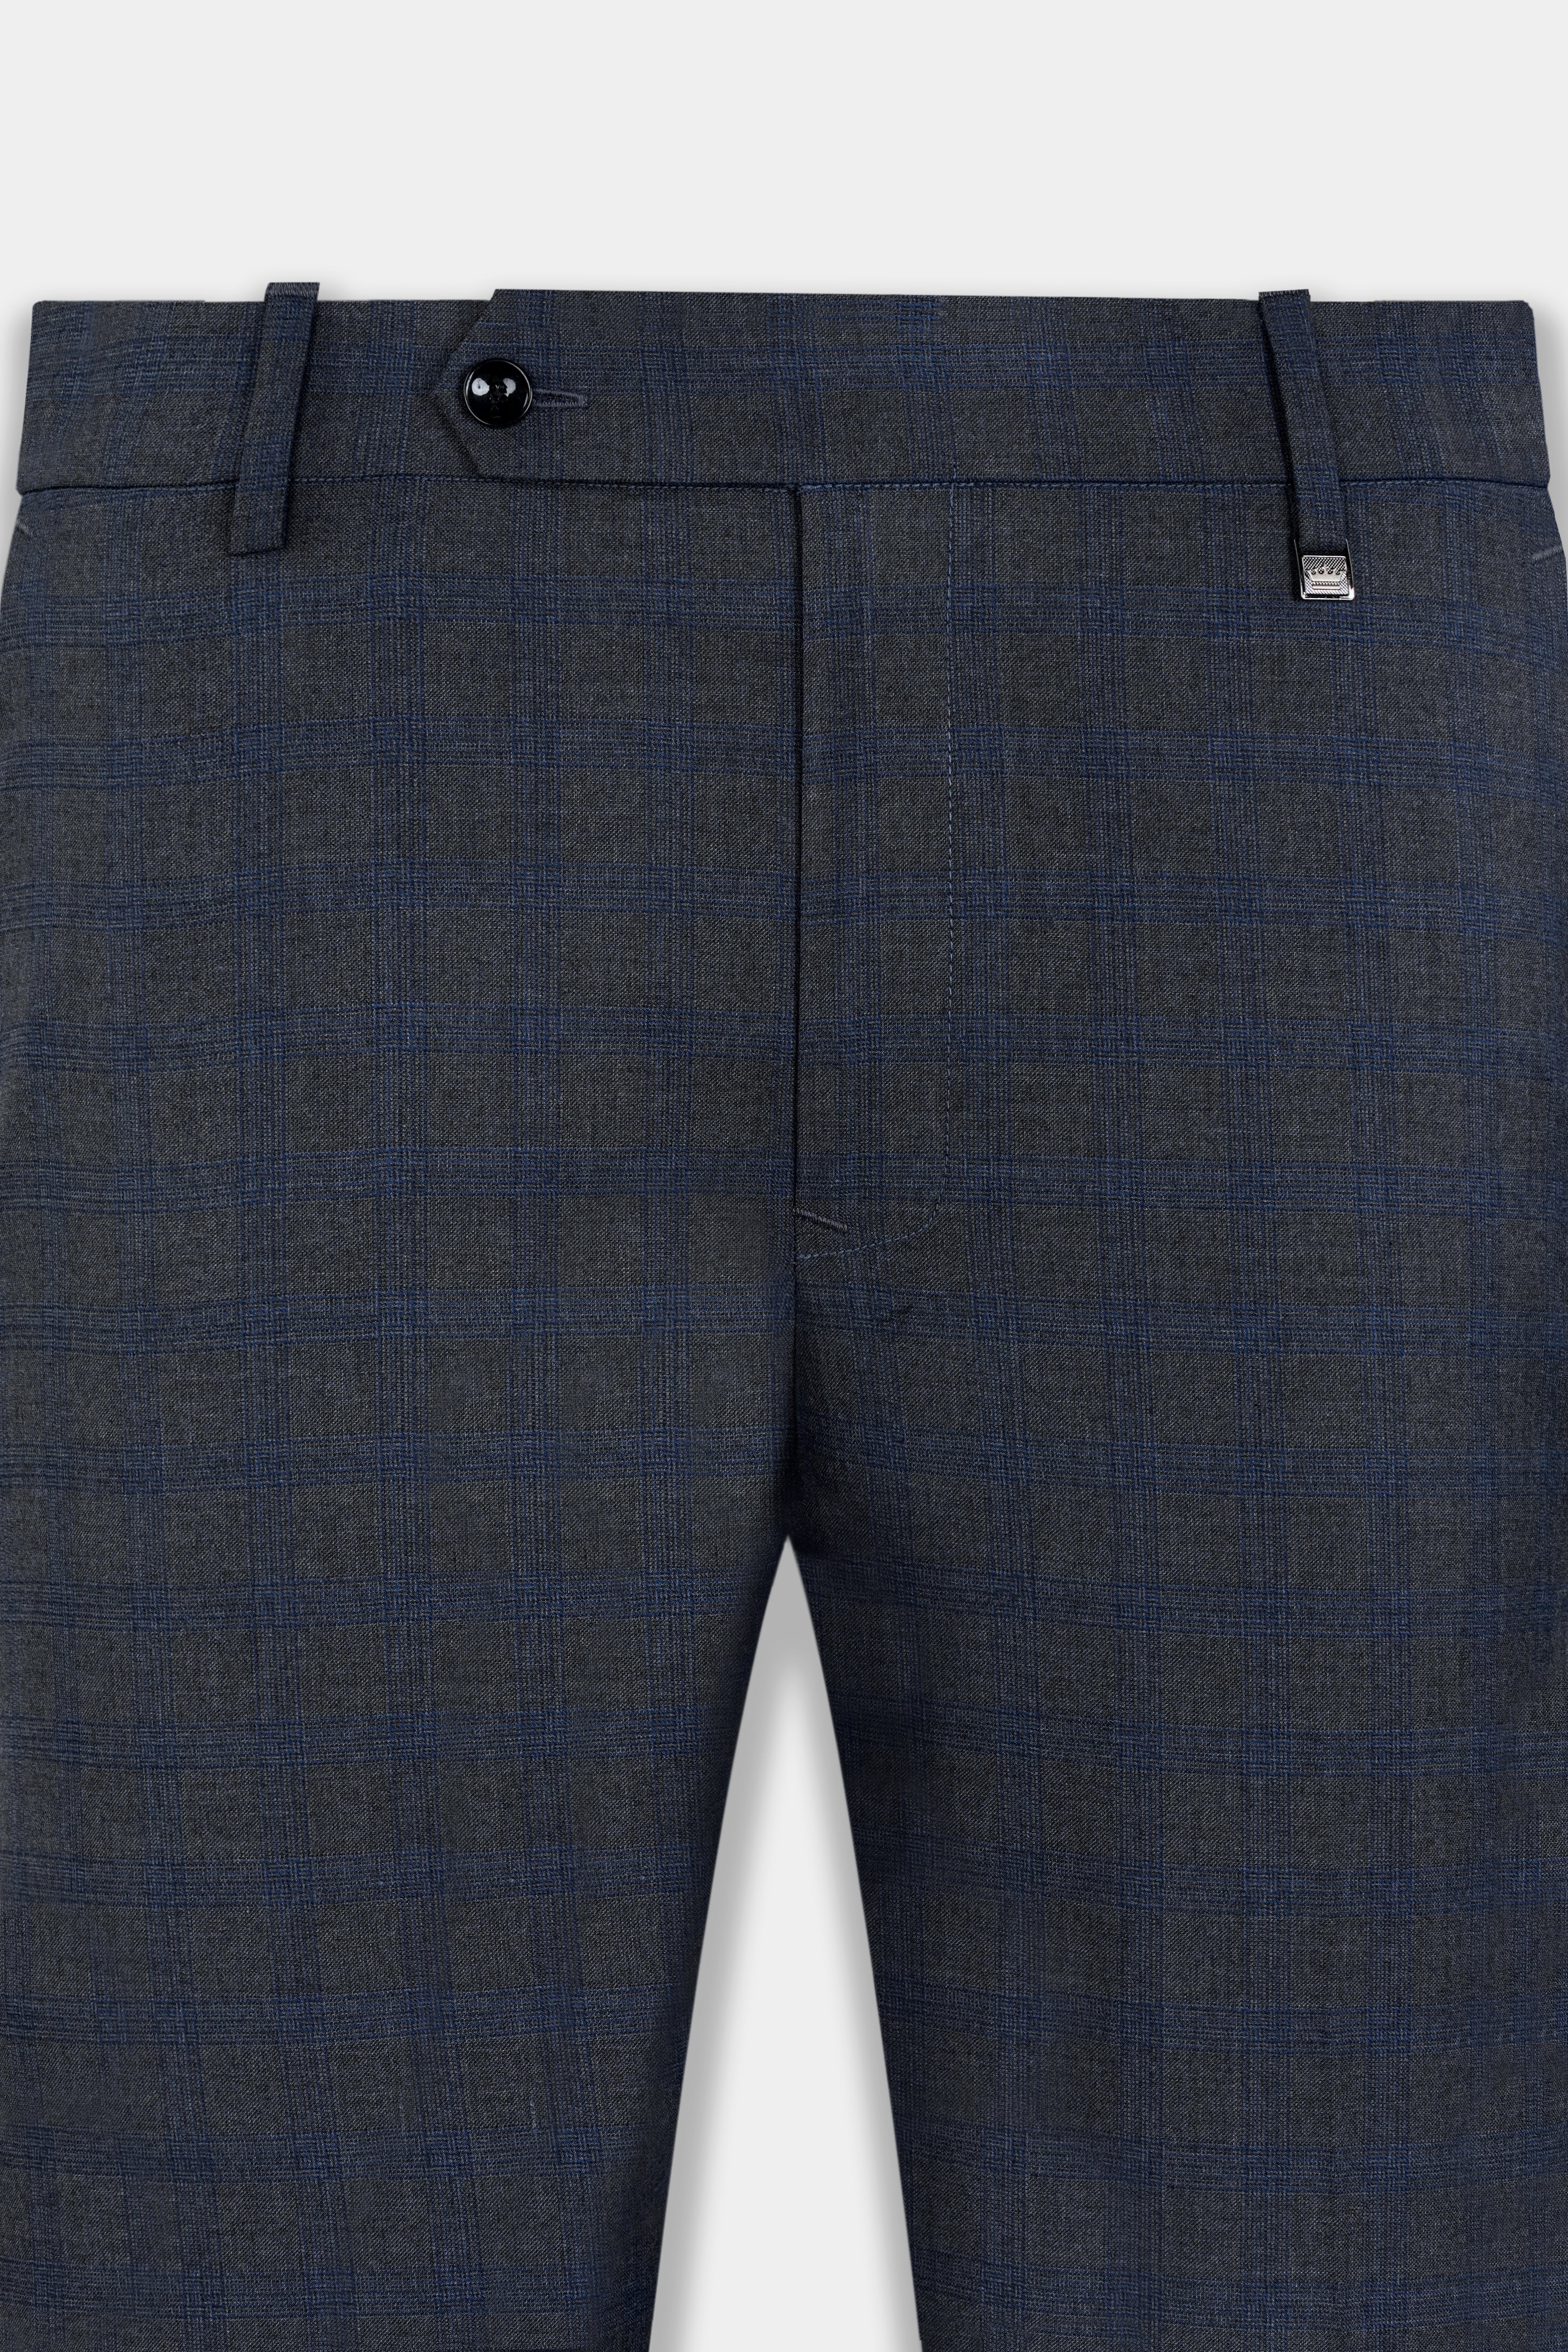 Cotton Plain Woolen Trousers in, Size: 30.0, Model Name/Number: 5828 at Rs  1000/piece in Noida